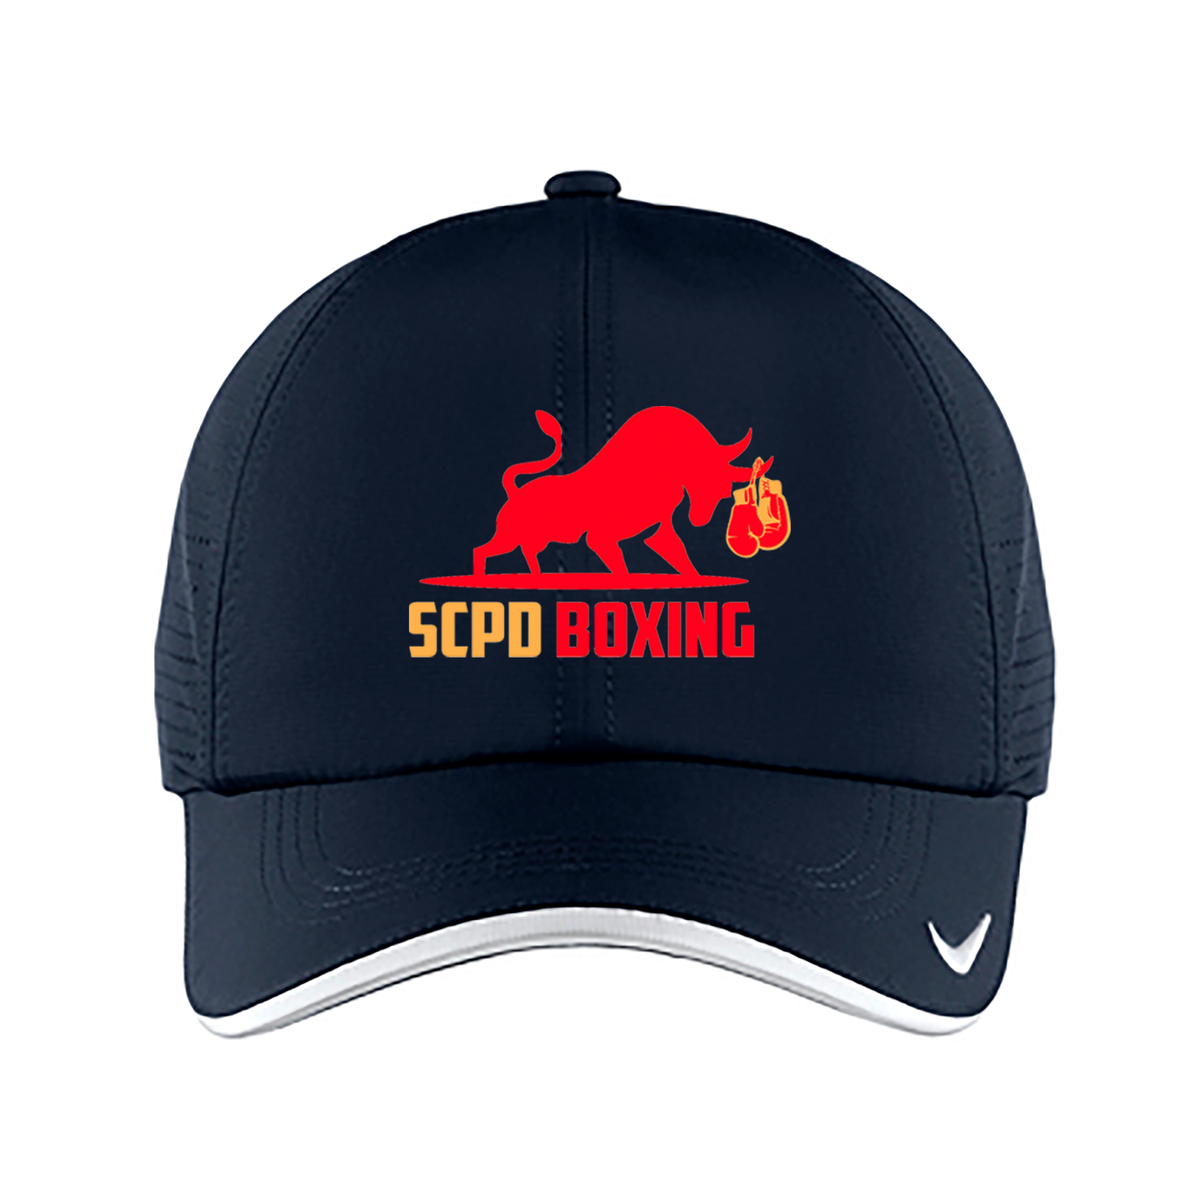 SCPD Boxing Nike Dri-FIT Perforated Performance Cap